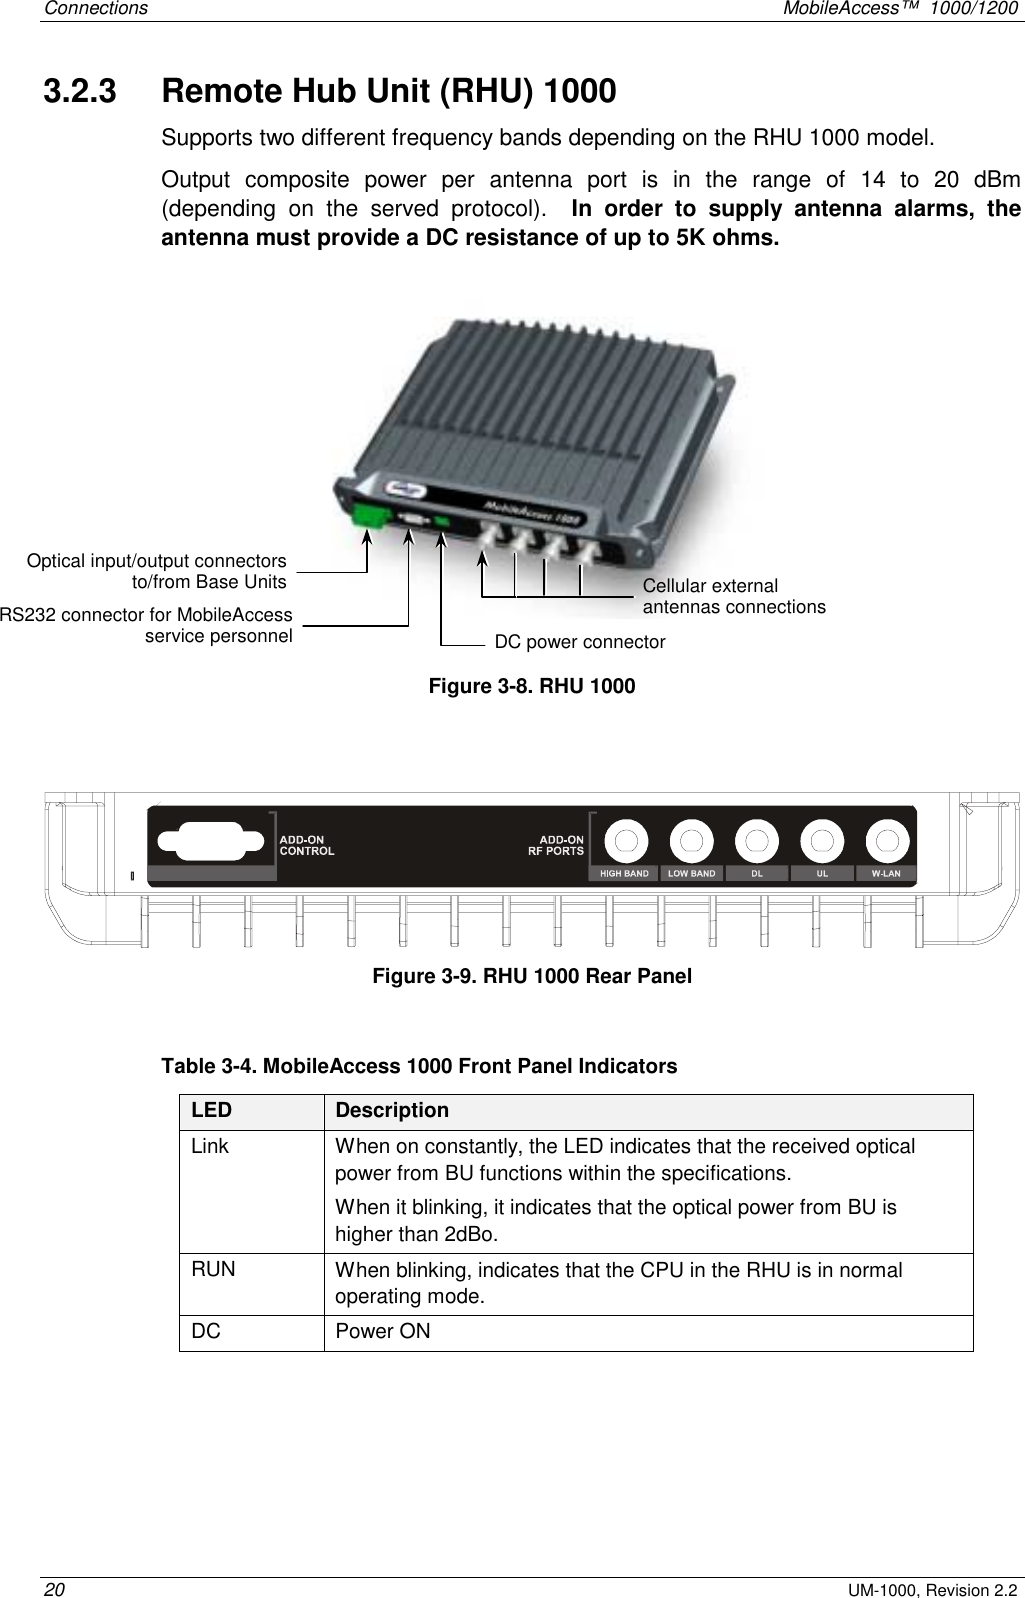 Connections    MobileAccess™  1000/1200 20 UM-1000, Revision 2.2 3.2.3   Remote Hub Unit (RHU) 1000 Supports two different frequency bands depending on the RHU 1000 model.  Output composite power per antenna port is in the range of 14 to 20 dBm (depending on the served protocol).  In order to supply antenna alarms, the antenna must provide a DC resistance of up to 5K ohms.   Figure  3-8. RHU 1000   Figure  3-9. RHU 1000 Rear Panel  Table  3-4. MobileAccess 1000 Front Panel Indicators LED  Description Link   When on constantly, the LED indicates that the received optical power from BU functions within the specifications.  When it blinking, it indicates that the optical power from BU is higher than 2dBo. RUN  When blinking, indicates that the CPU in the RHU is in normal operating mode. DC Power ON     Cellular external antennas connections Optical input/output connectors to/from Base UnitsDC power connector RS232 connector for MobileAccessservice personnel